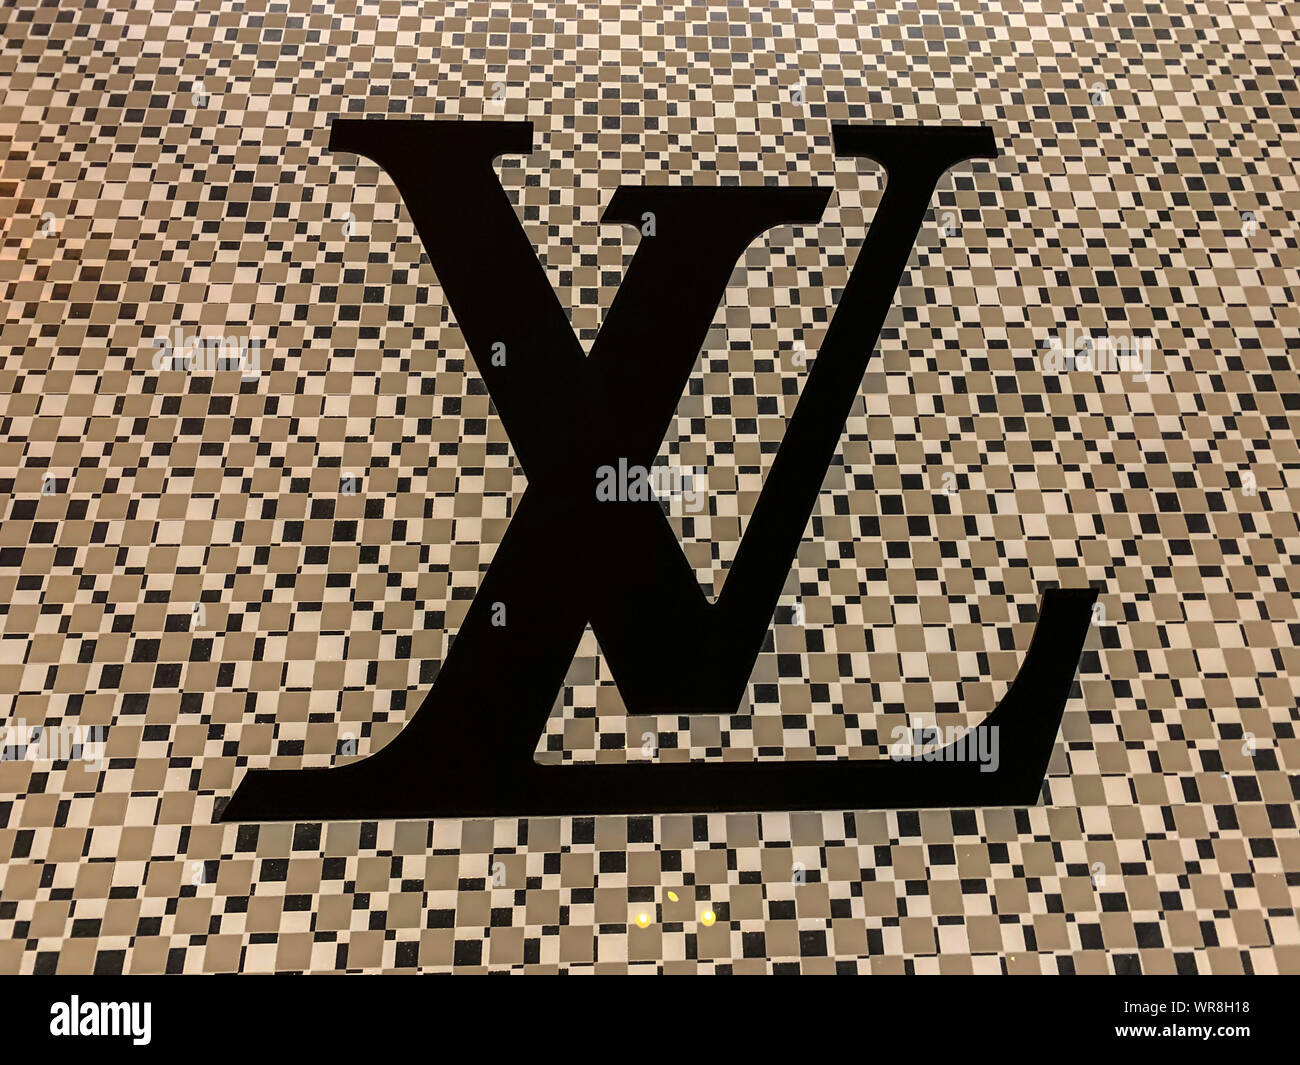 Louis vuitton web page hi-res stock photography and images - Alamy